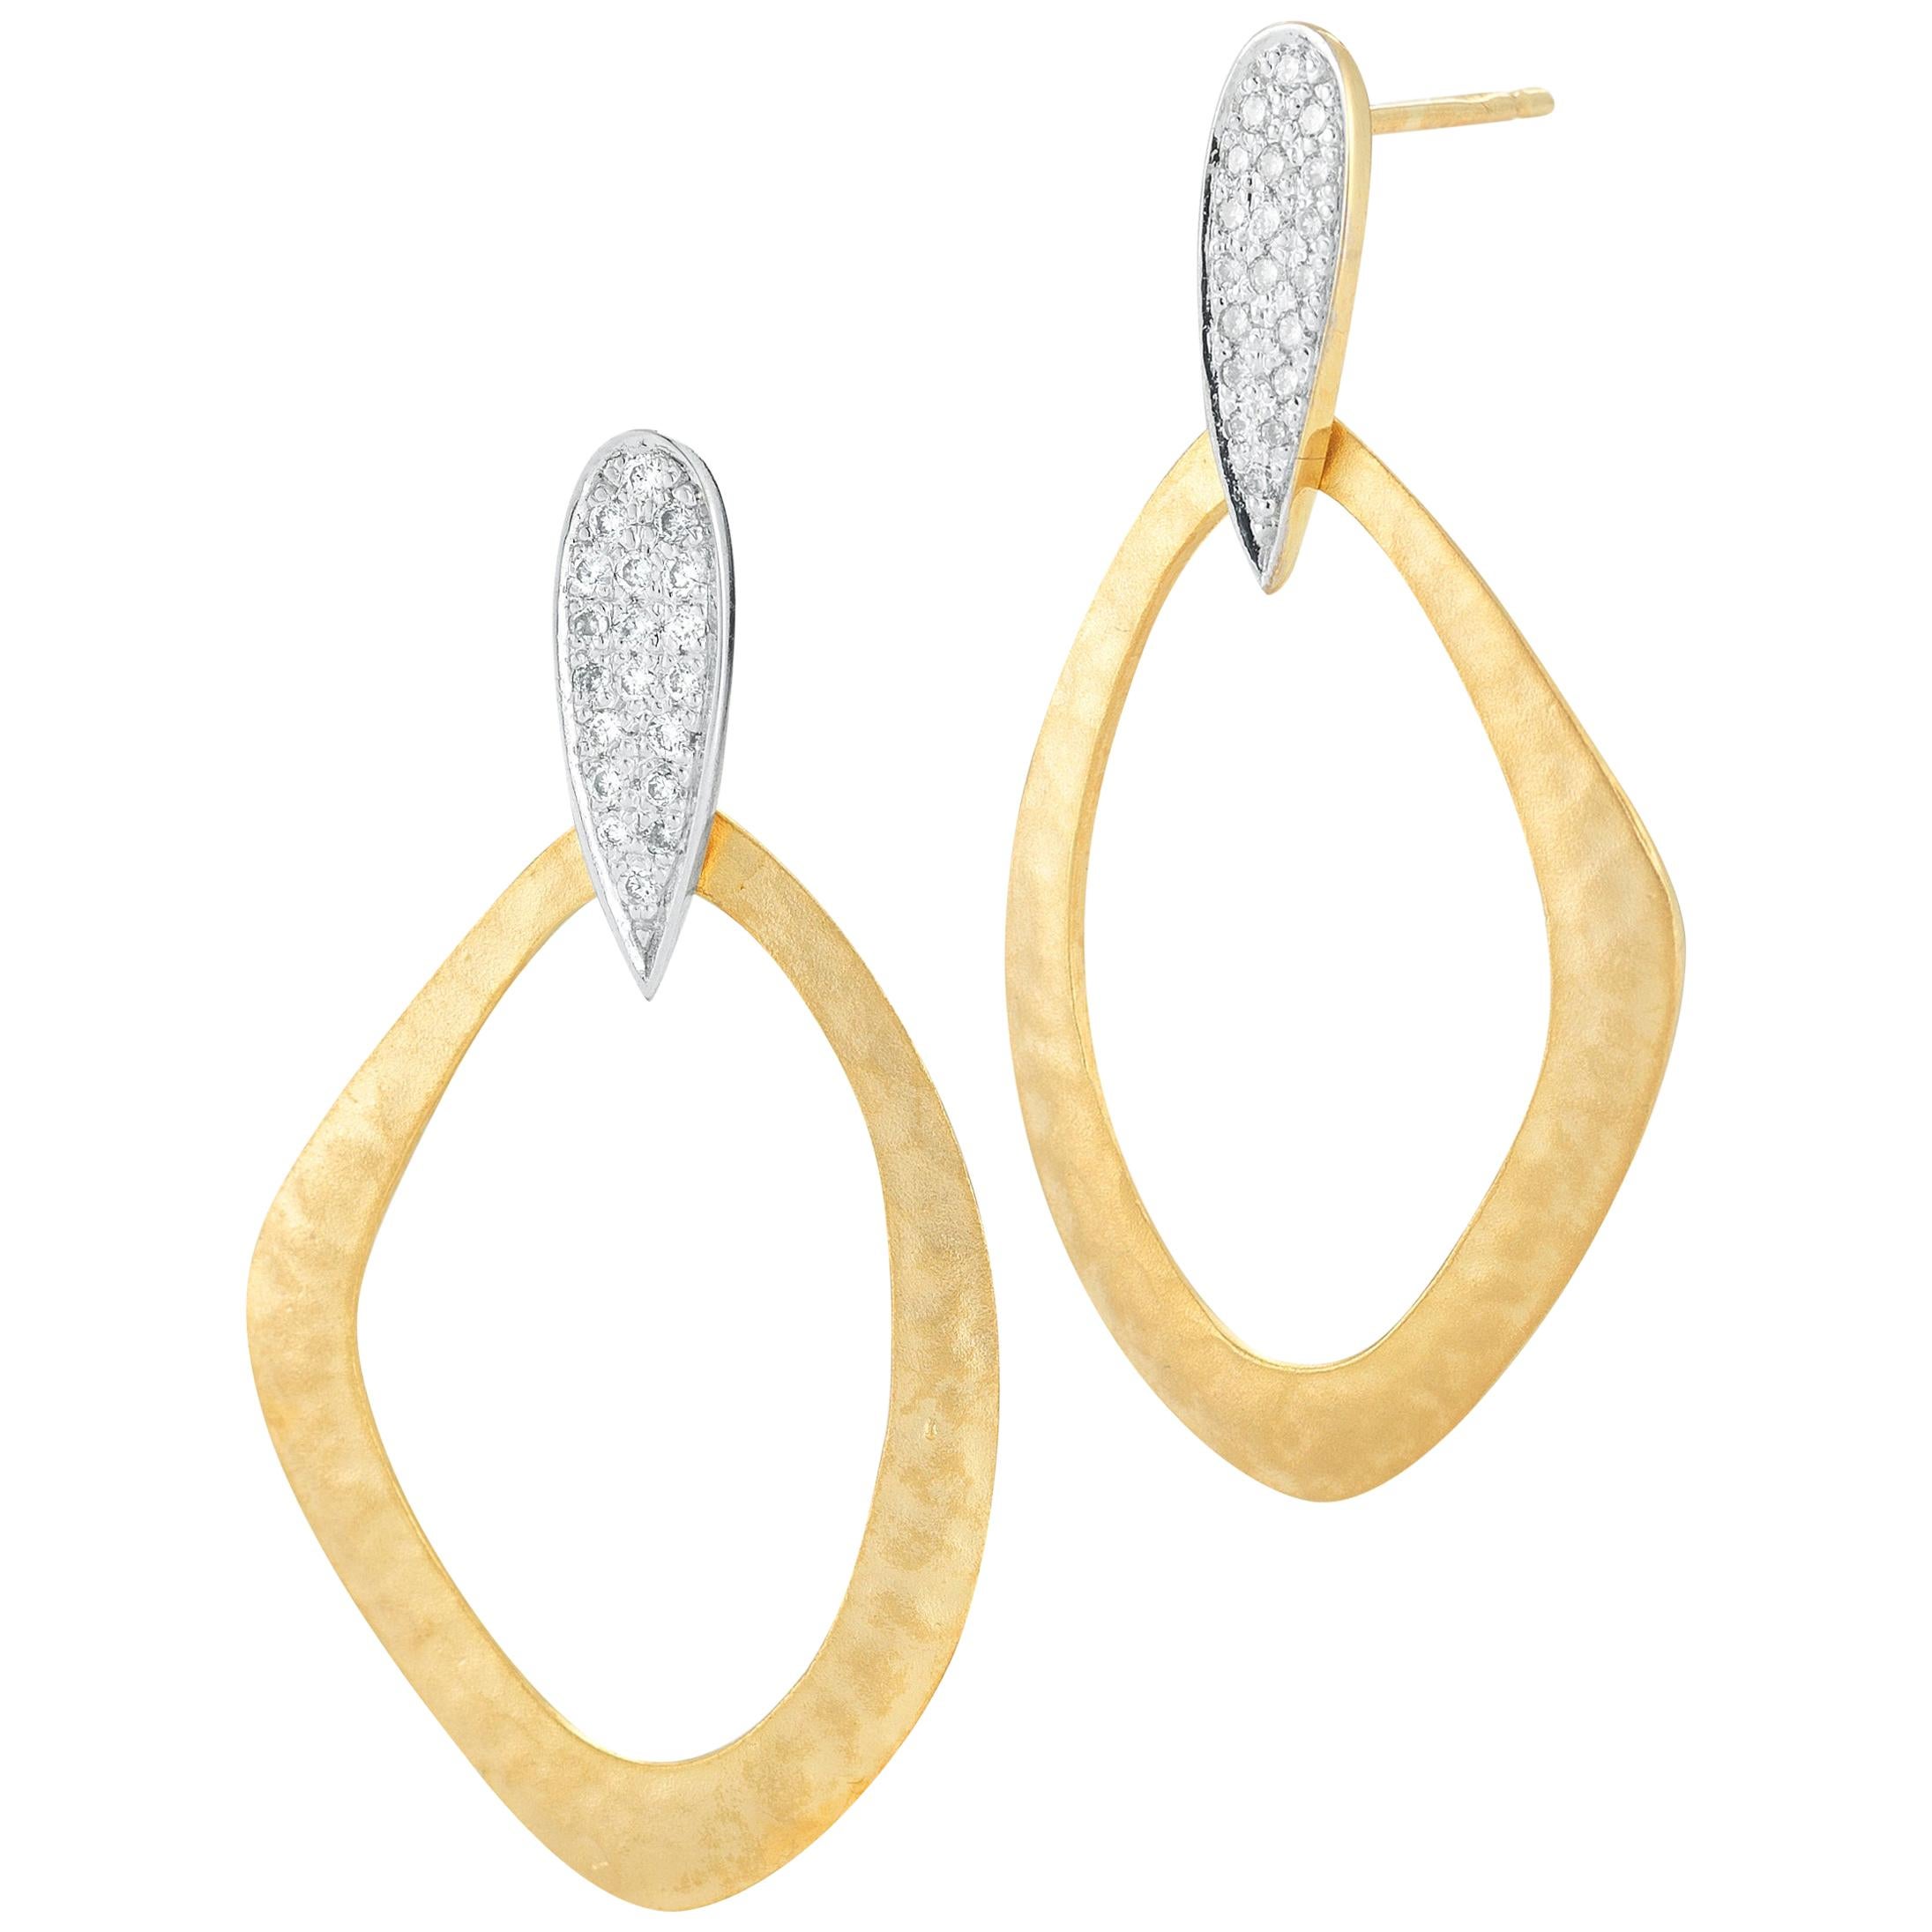 Handcrafted 14 Karat Yellow Gold Open Freeform Hammered Earrings For Sale